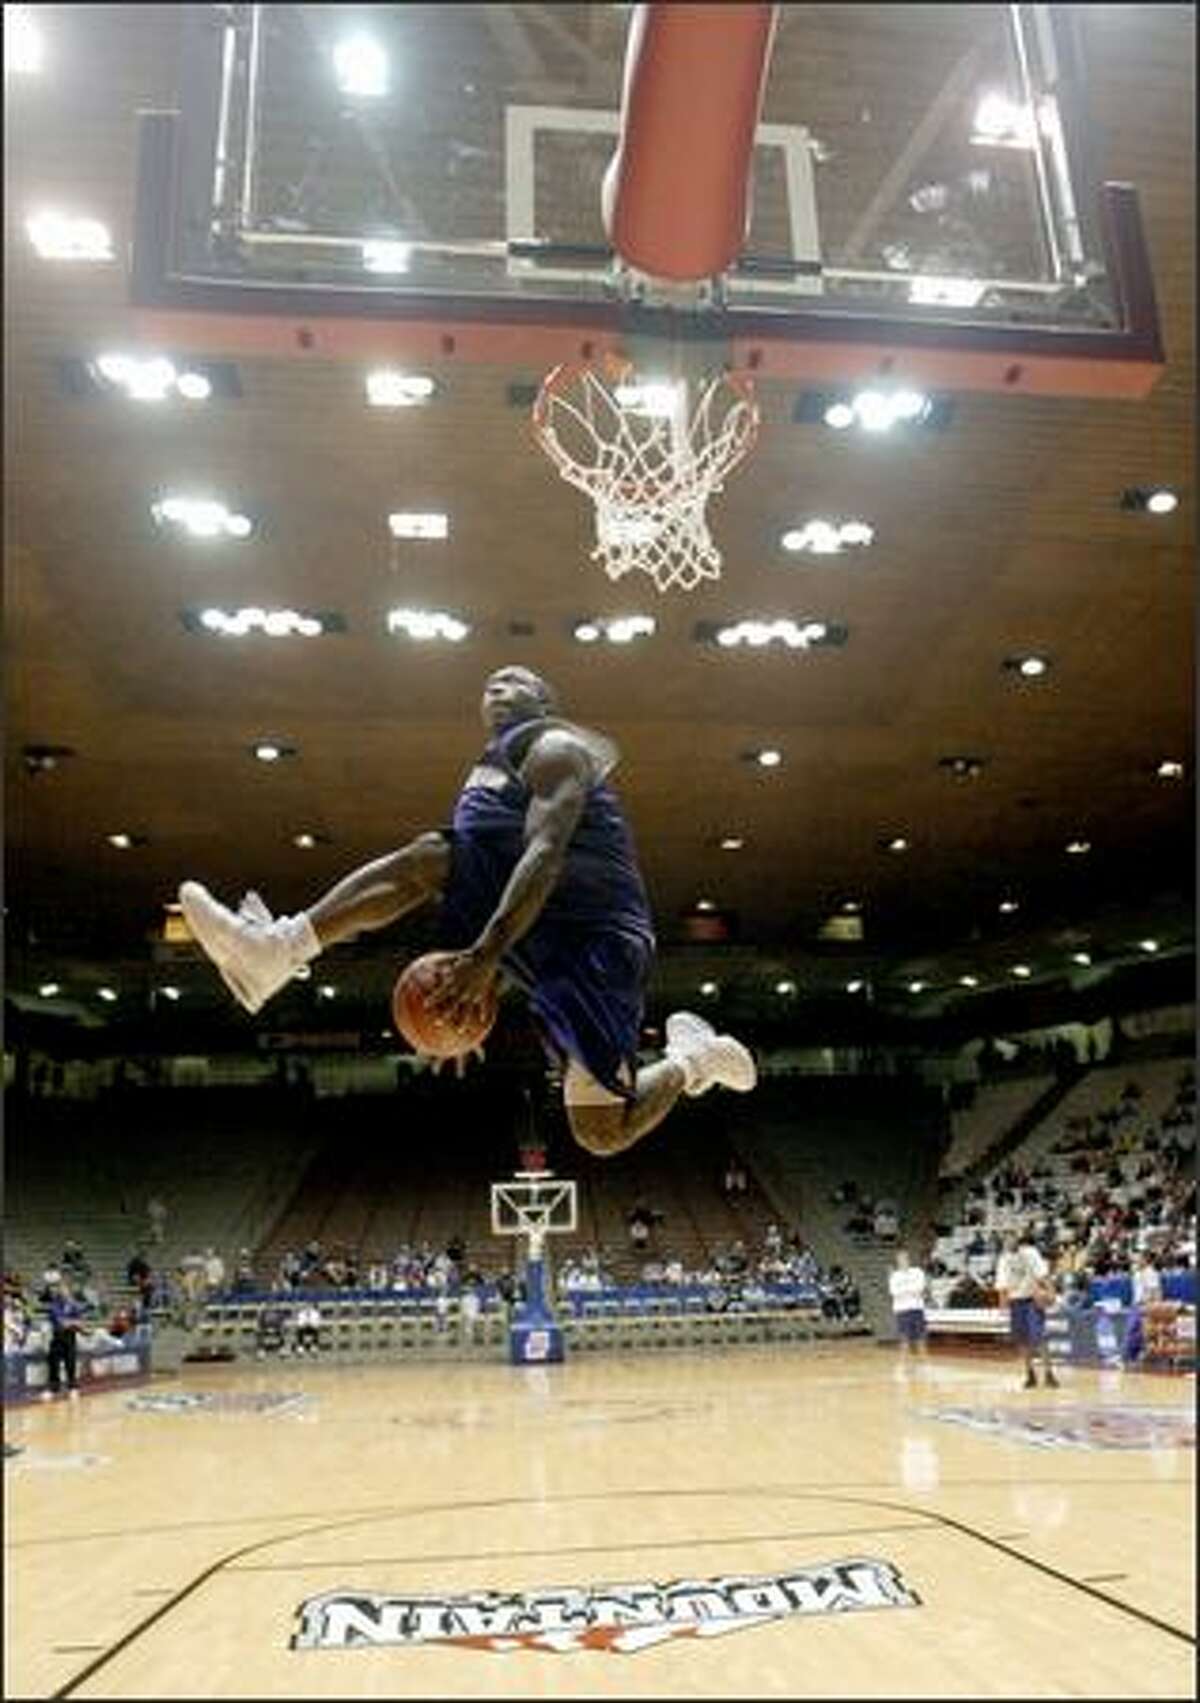 Nate Robinson works the ball through his legs before throwing down a dunk during a workout at The Pit, before the Huskies played -- and were defeated by -- Louisville in the NCAA playoffs.